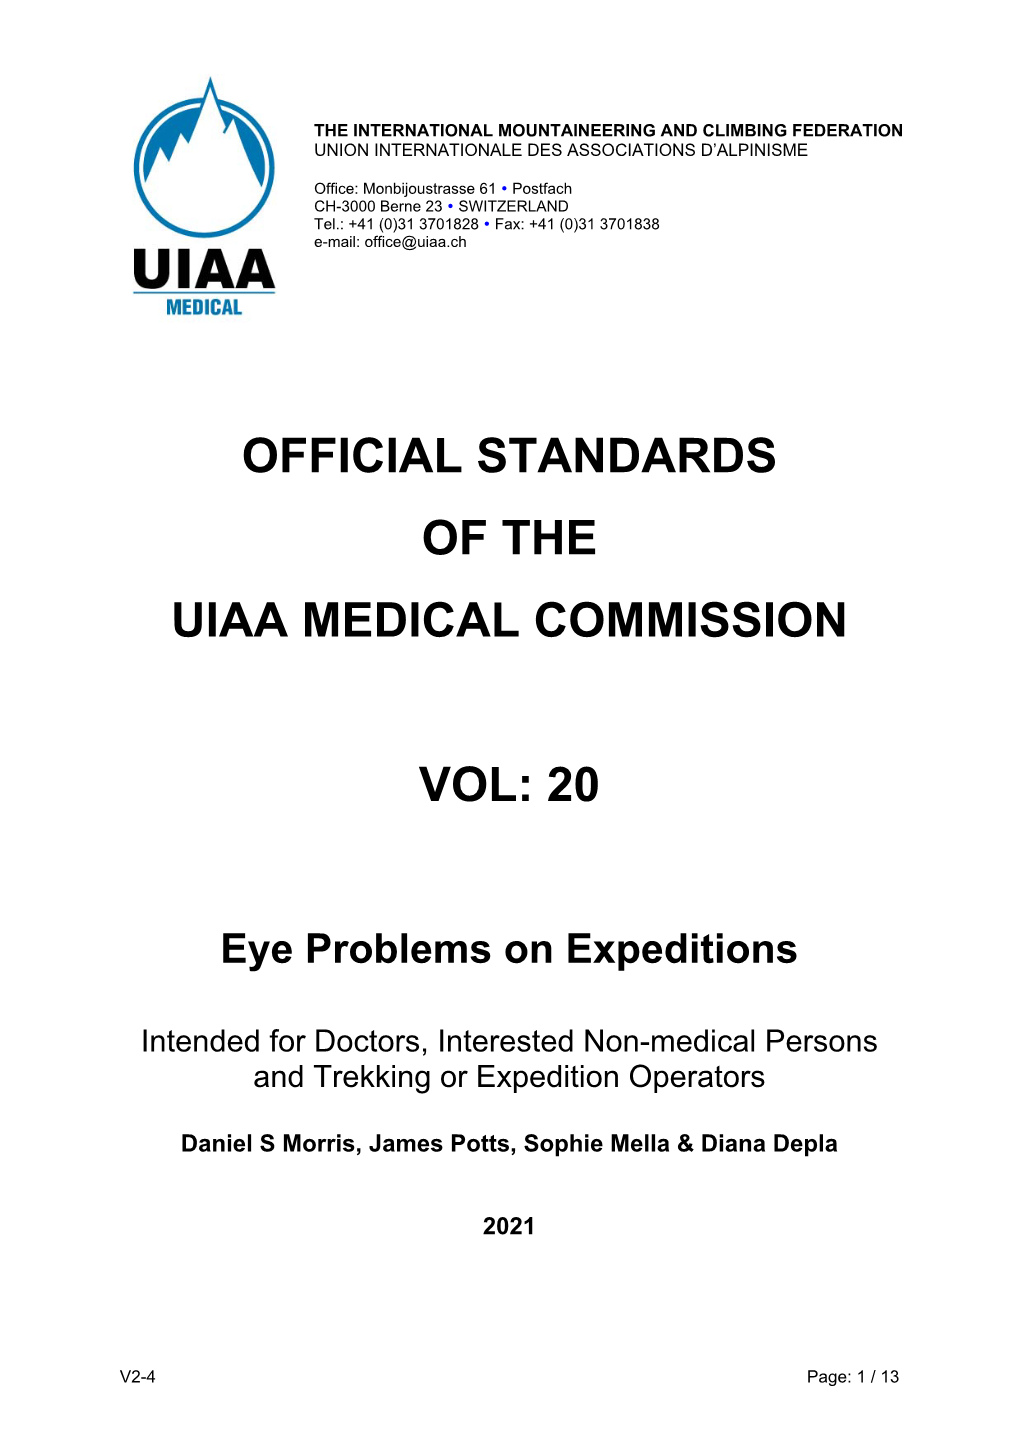 Official Standards of the Uiaa Medical Commission Vol: 20